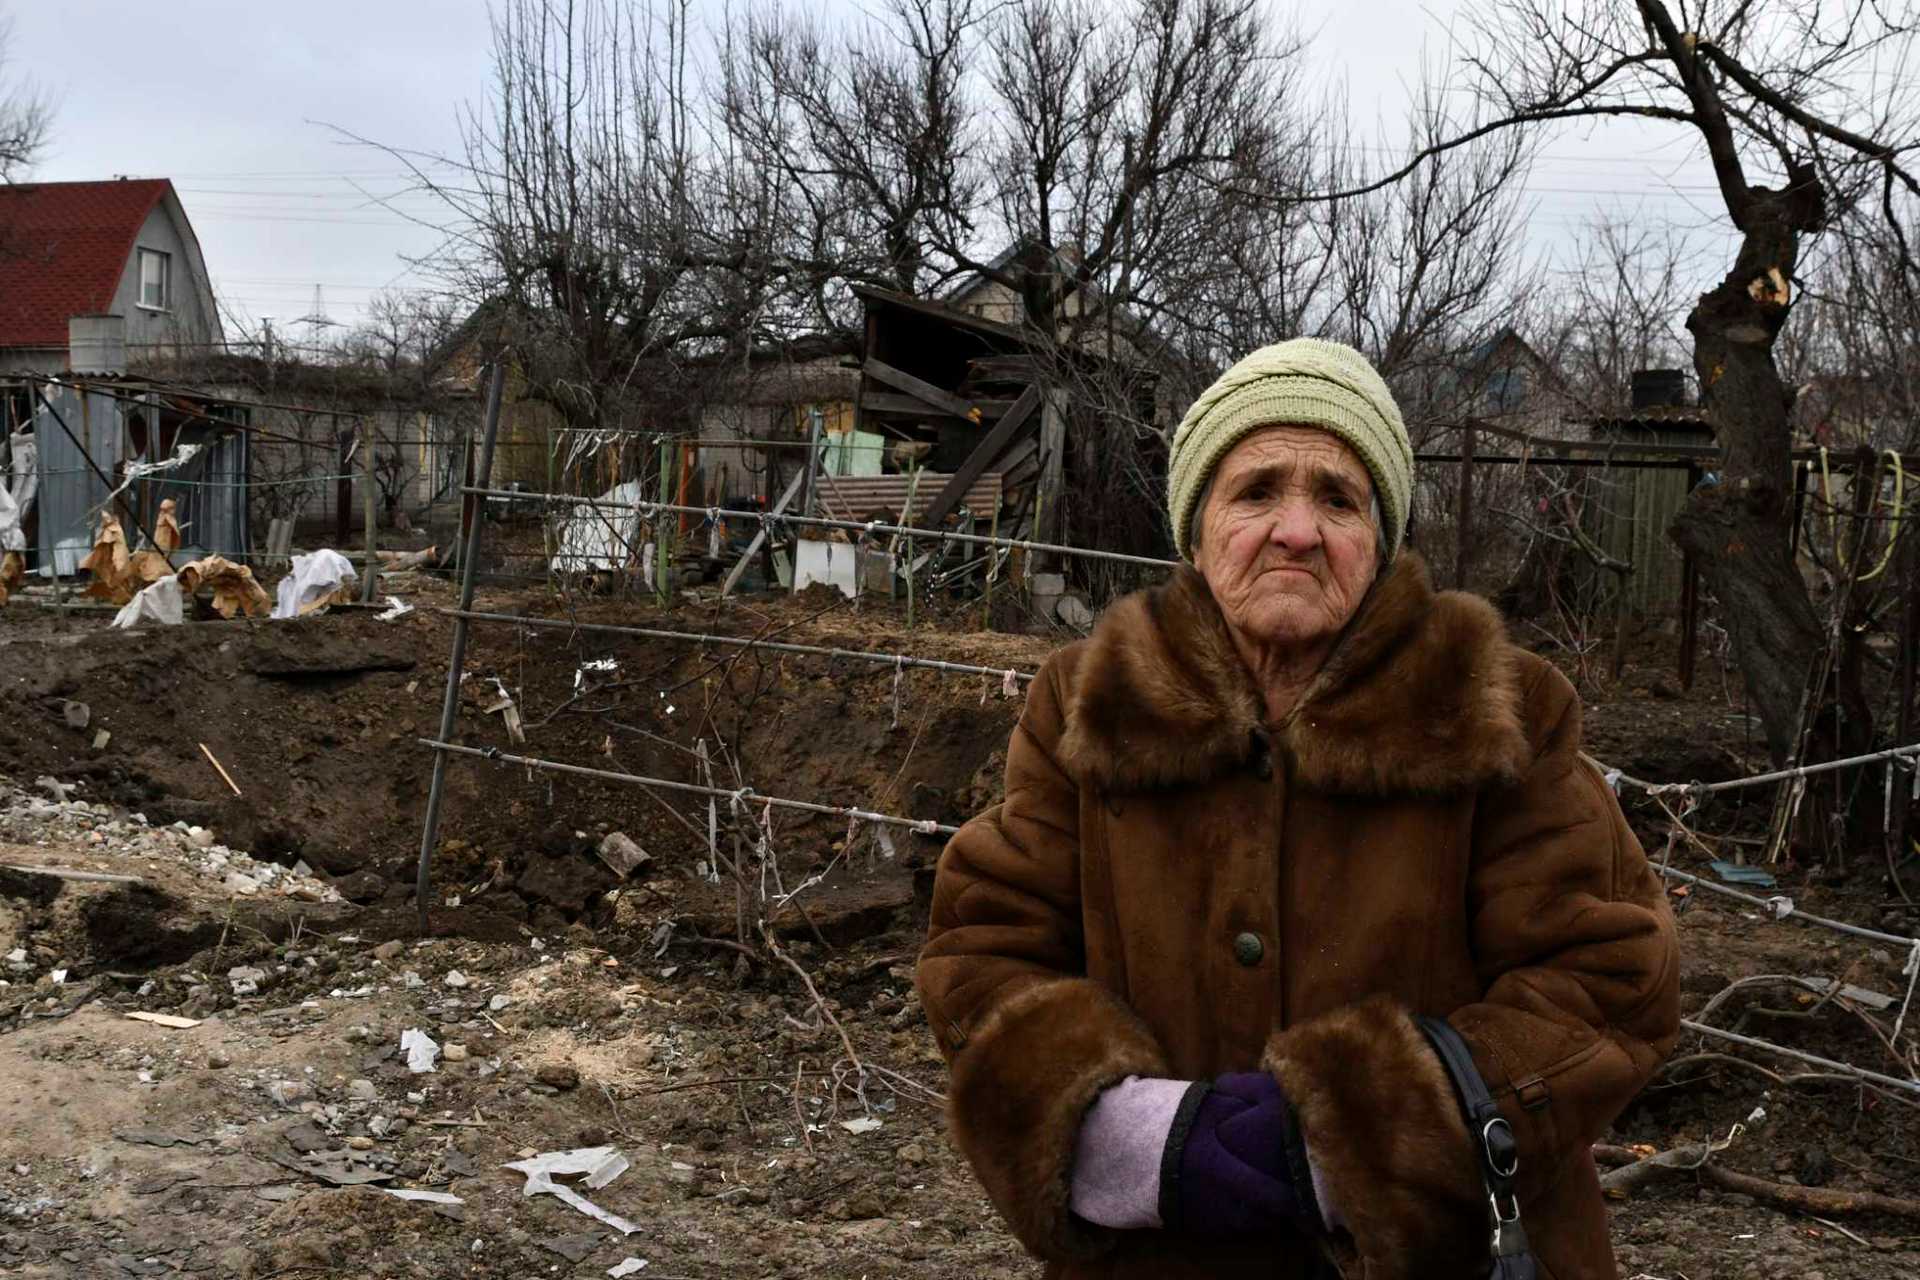 Tamara Makshanova 75, stands near a crater left by the Russian rocket that damaged her home in Zaporizhzhya